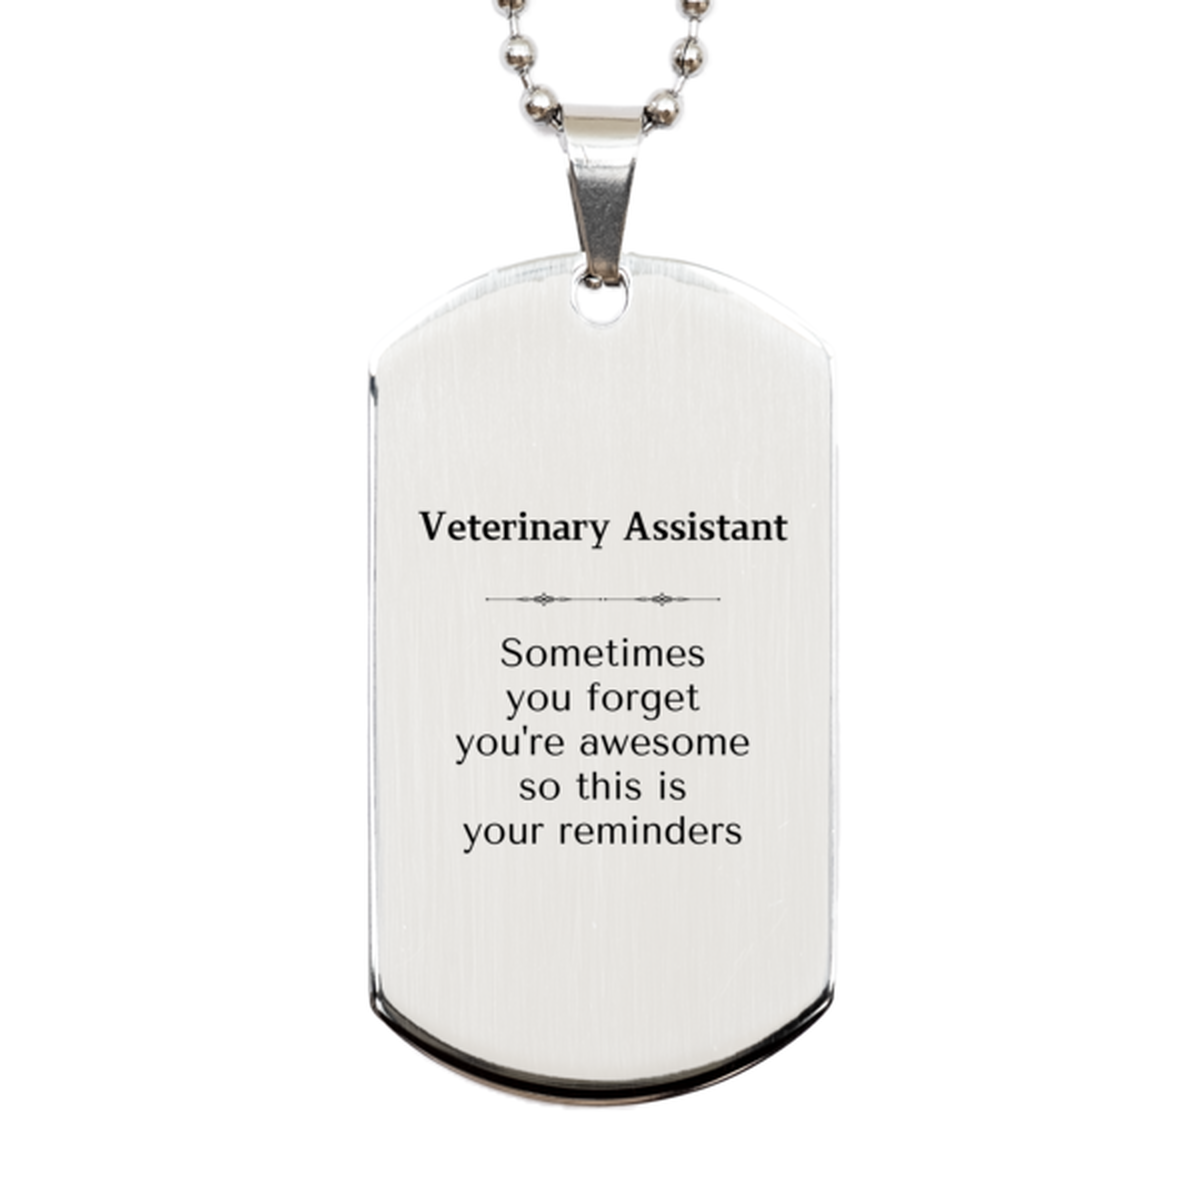 Sentimental Veterinary Assistant Silver Dog Tag, Veterinary Assistant Sometimes you forget you're awesome so this is your reminders, Graduation Christmas Birthday Gifts for Veterinary Assistant, Men, Women, Coworkers